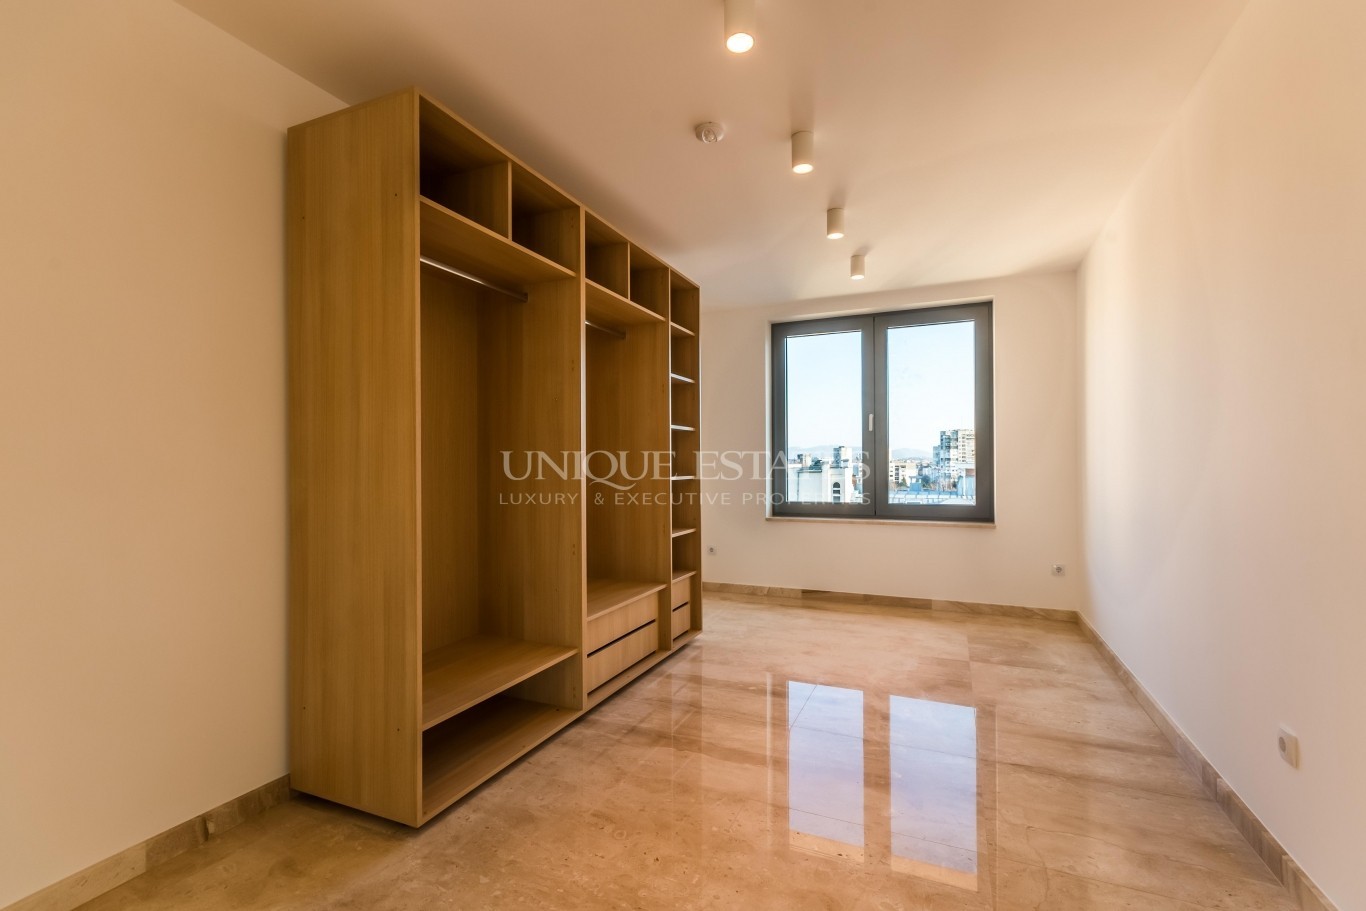 Penthouse for sale in Sofia, Motopista with listing ID: K8037 - image 16